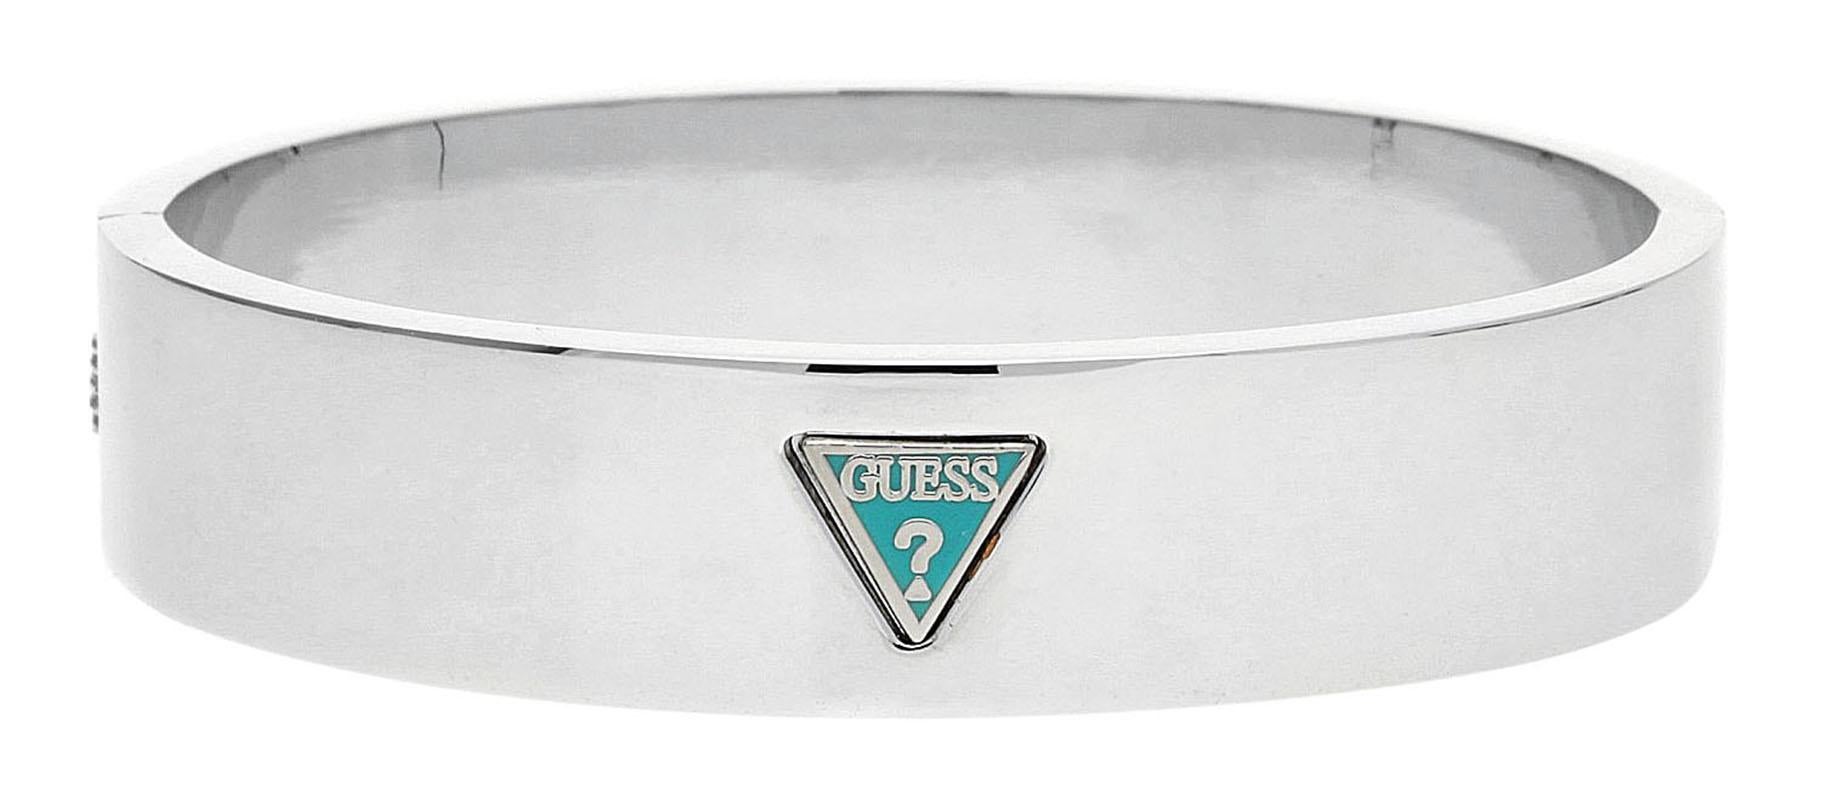 Item number: UBB11482
material: metal
length horizontal: 6,2 cm, vertical: 5,1 cm
width 1,5 cm
Color: silver-turquoise-aqua
Clasp: magnetic closure
Weight net 65
Delivery: in Guess Jewelry pouch